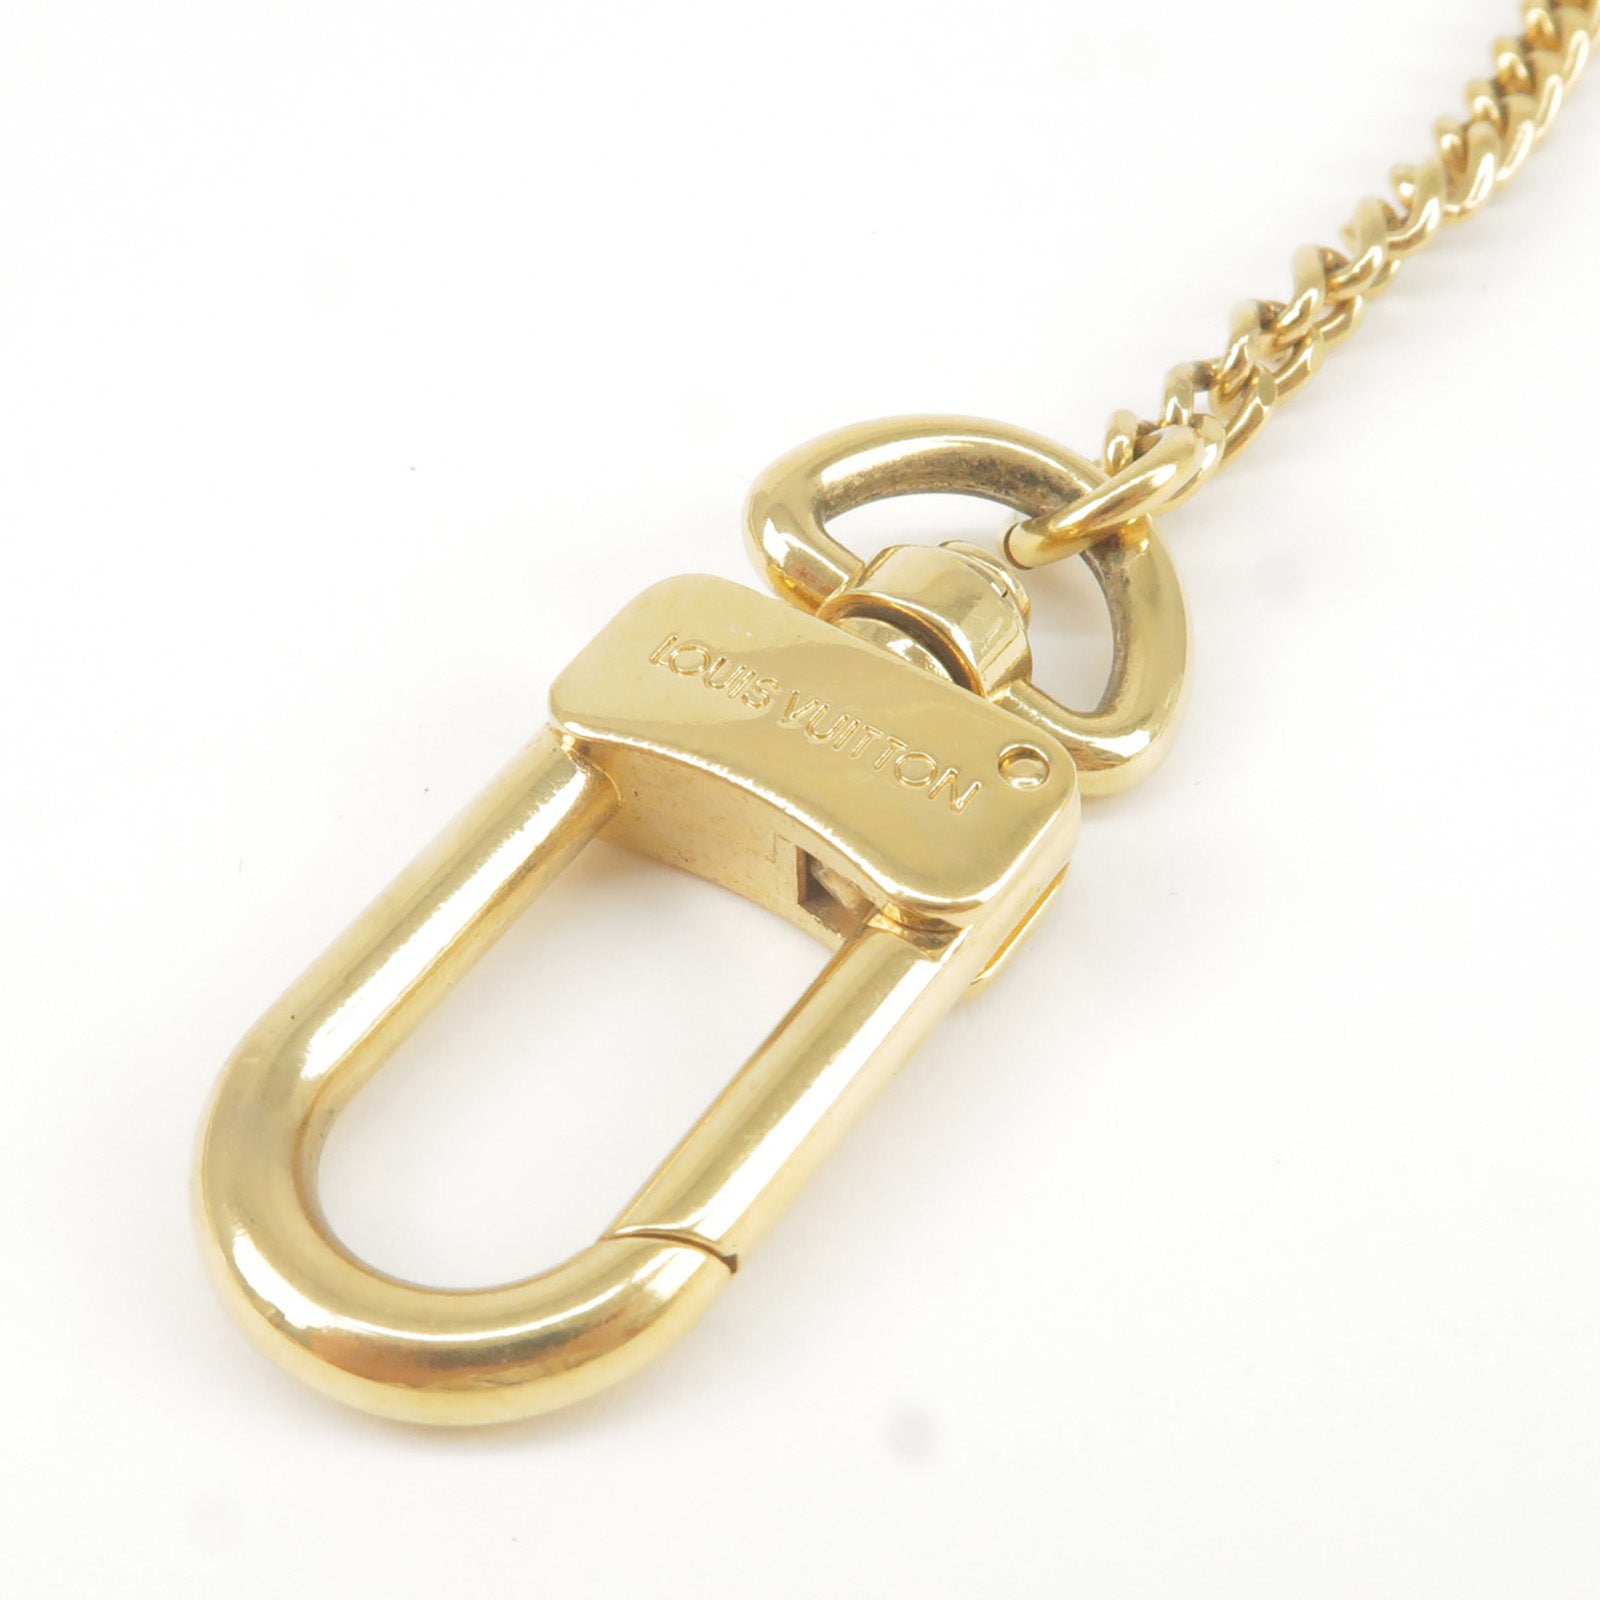 Authentic-Louis-Vuitton-Chenne-Ano-Cles-Key-Chain-Key-Charm-Gold